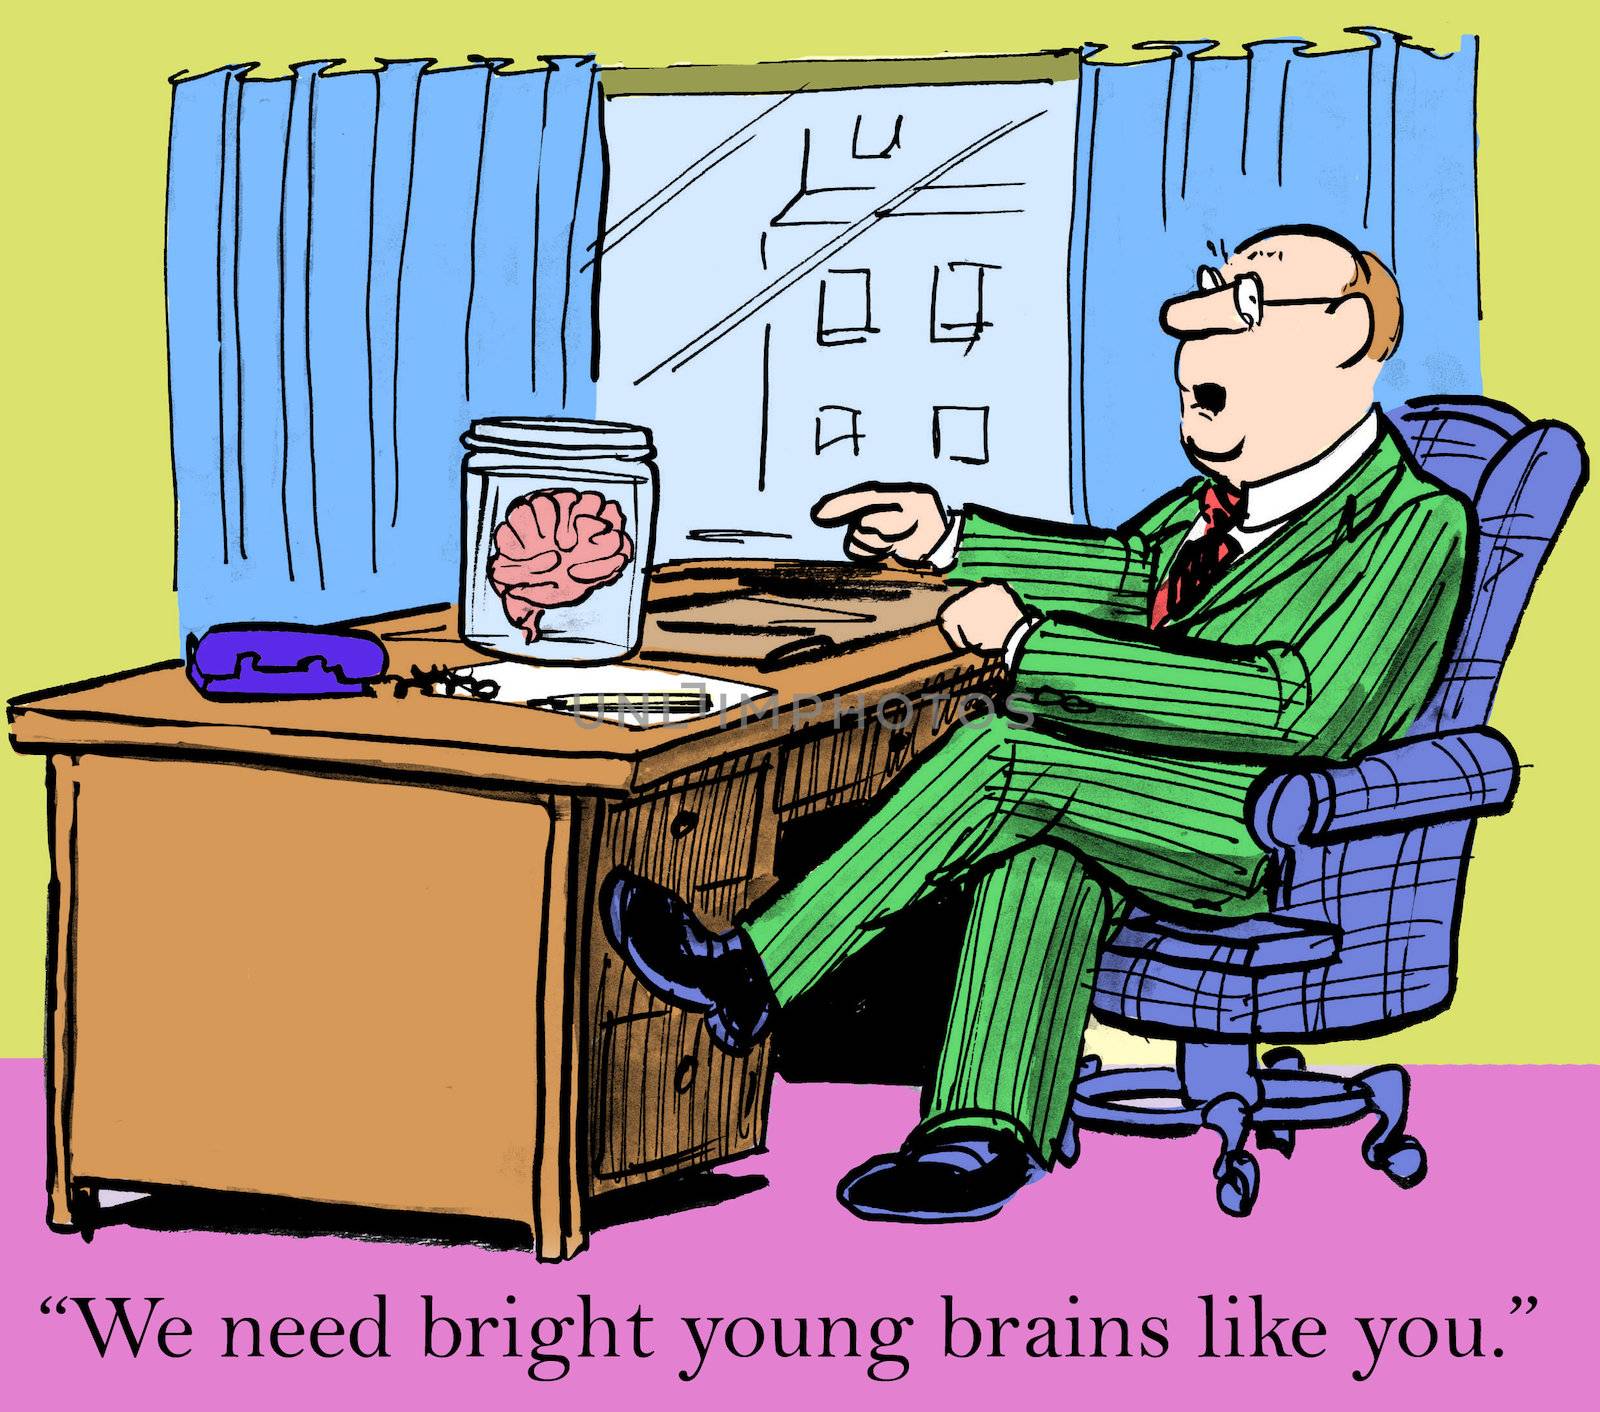 "We need bright young brains like you."